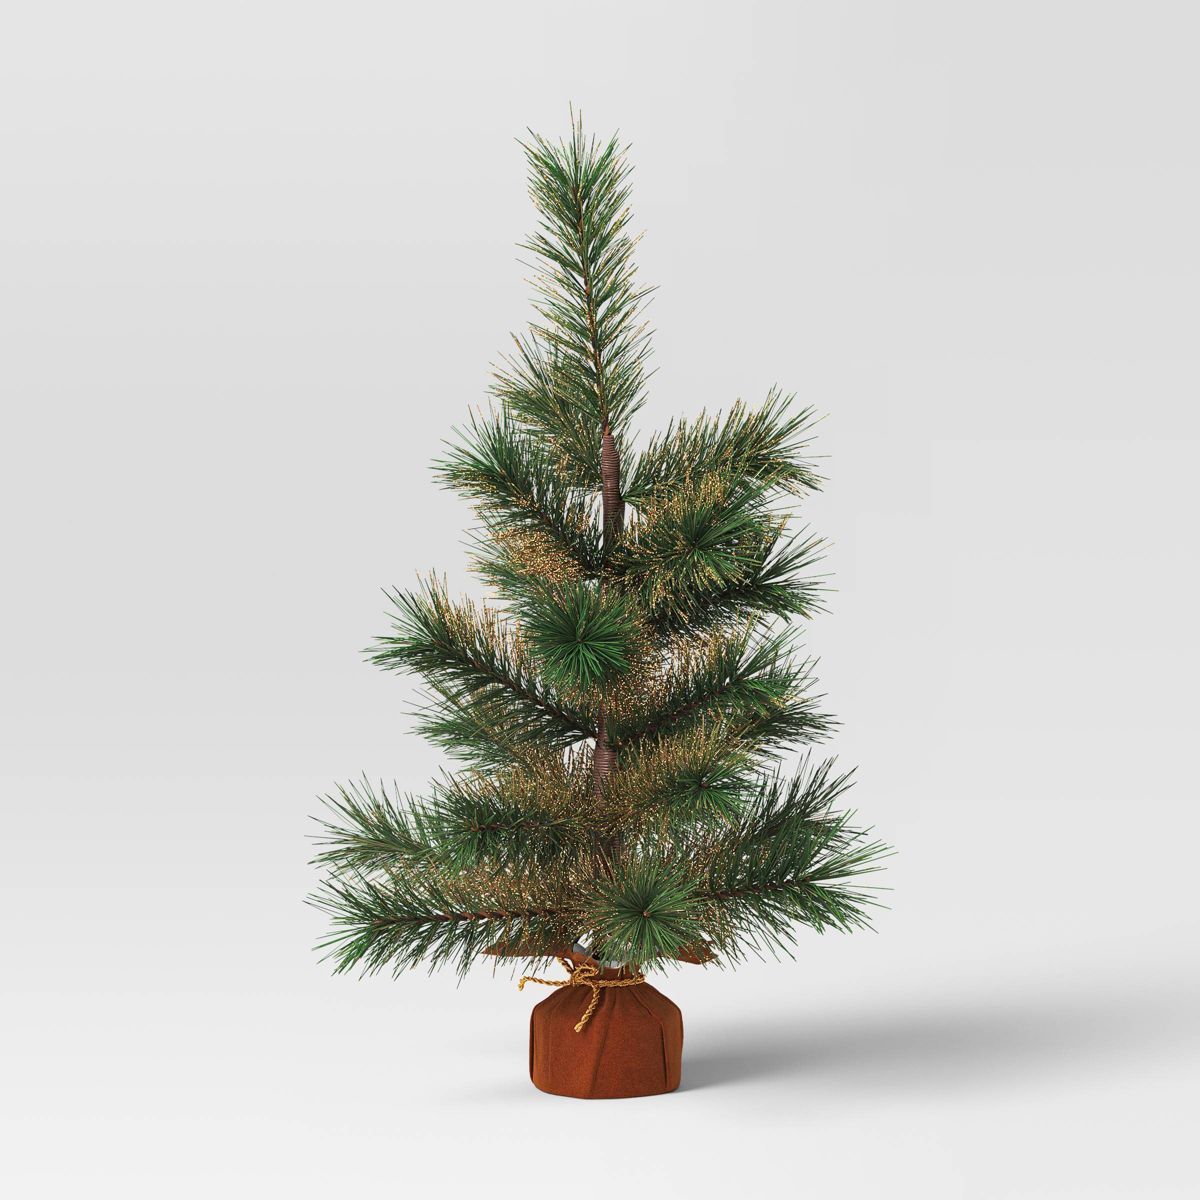 18" Artificial Mini Christmas Tree with Glittered Tips Green/Gold - Wondershop™ | Target